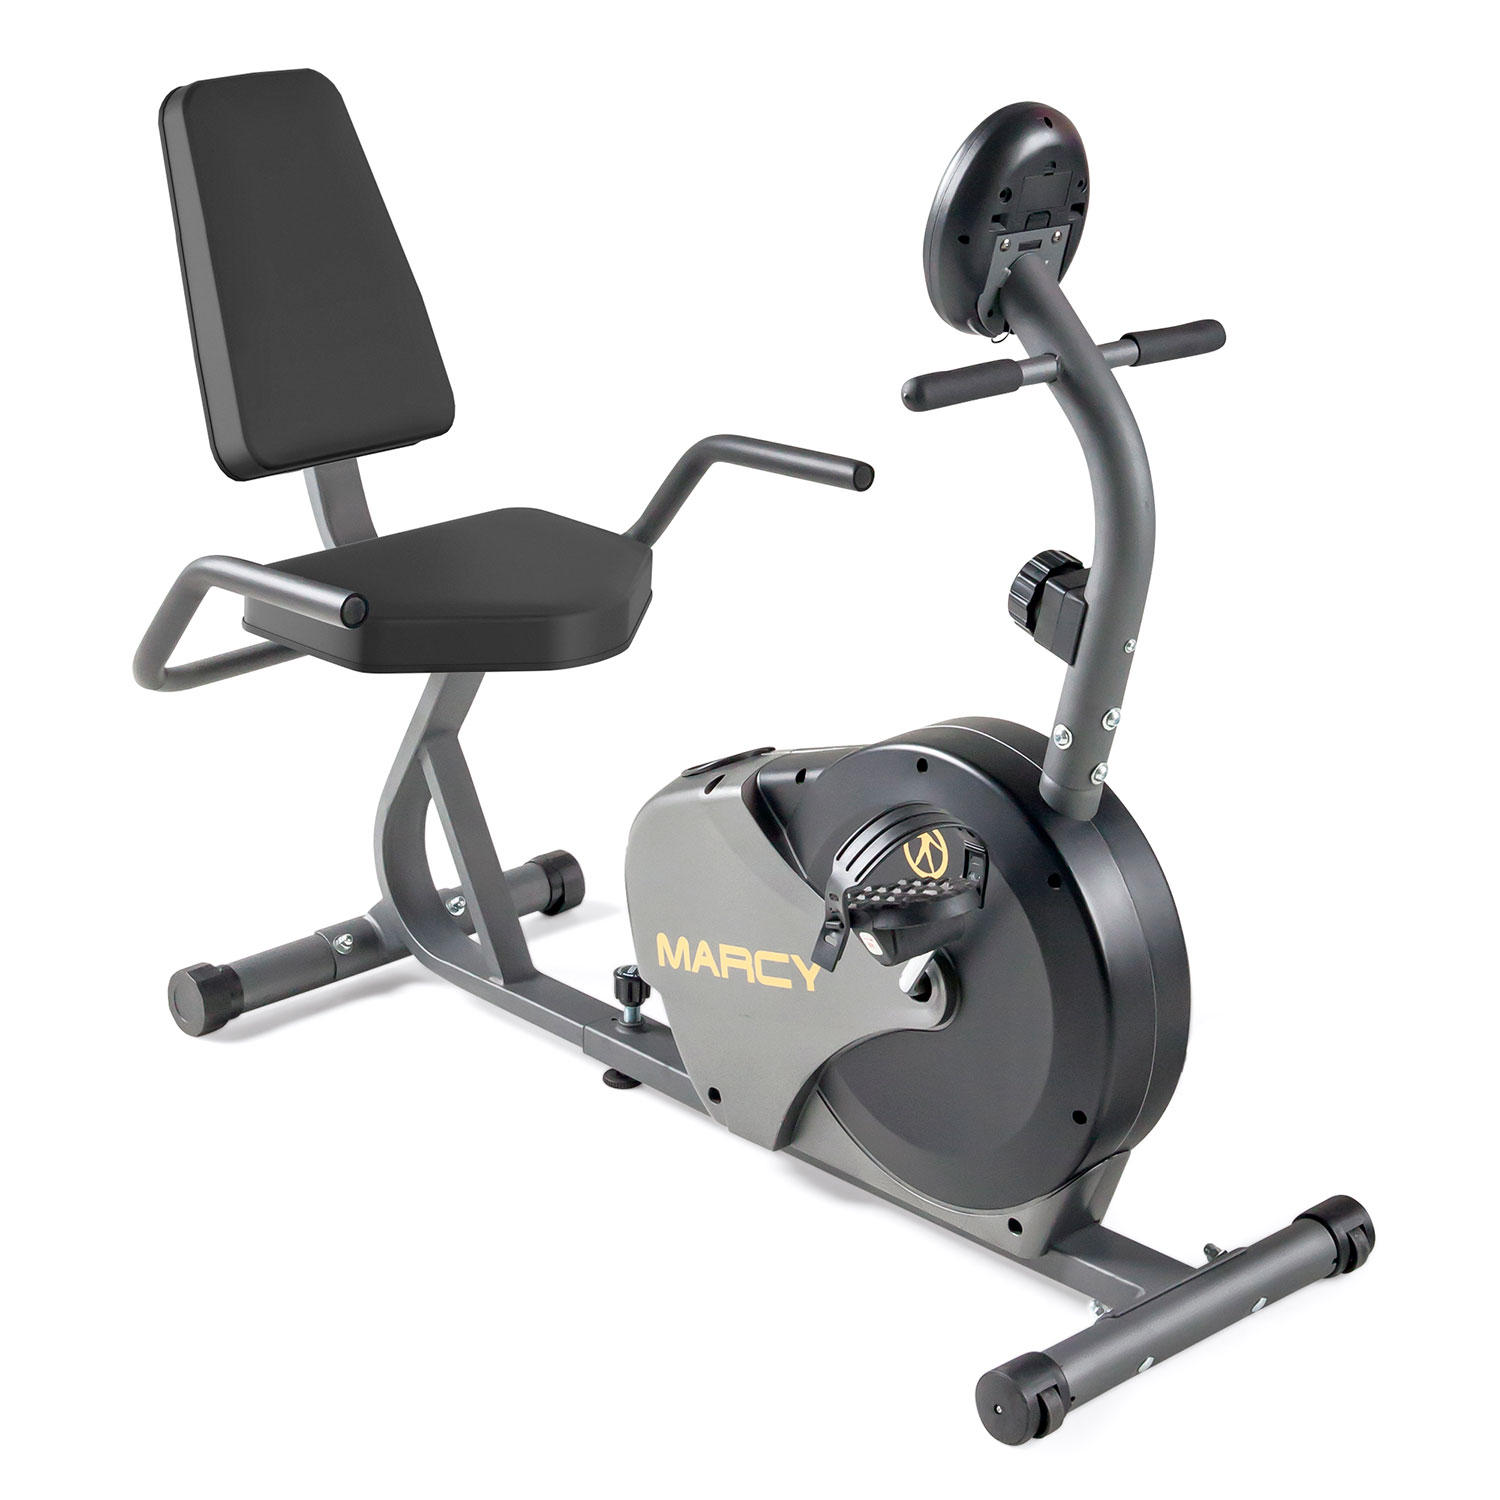 Marcy Recumbent Magnetic Exercise Cycle NS-716R